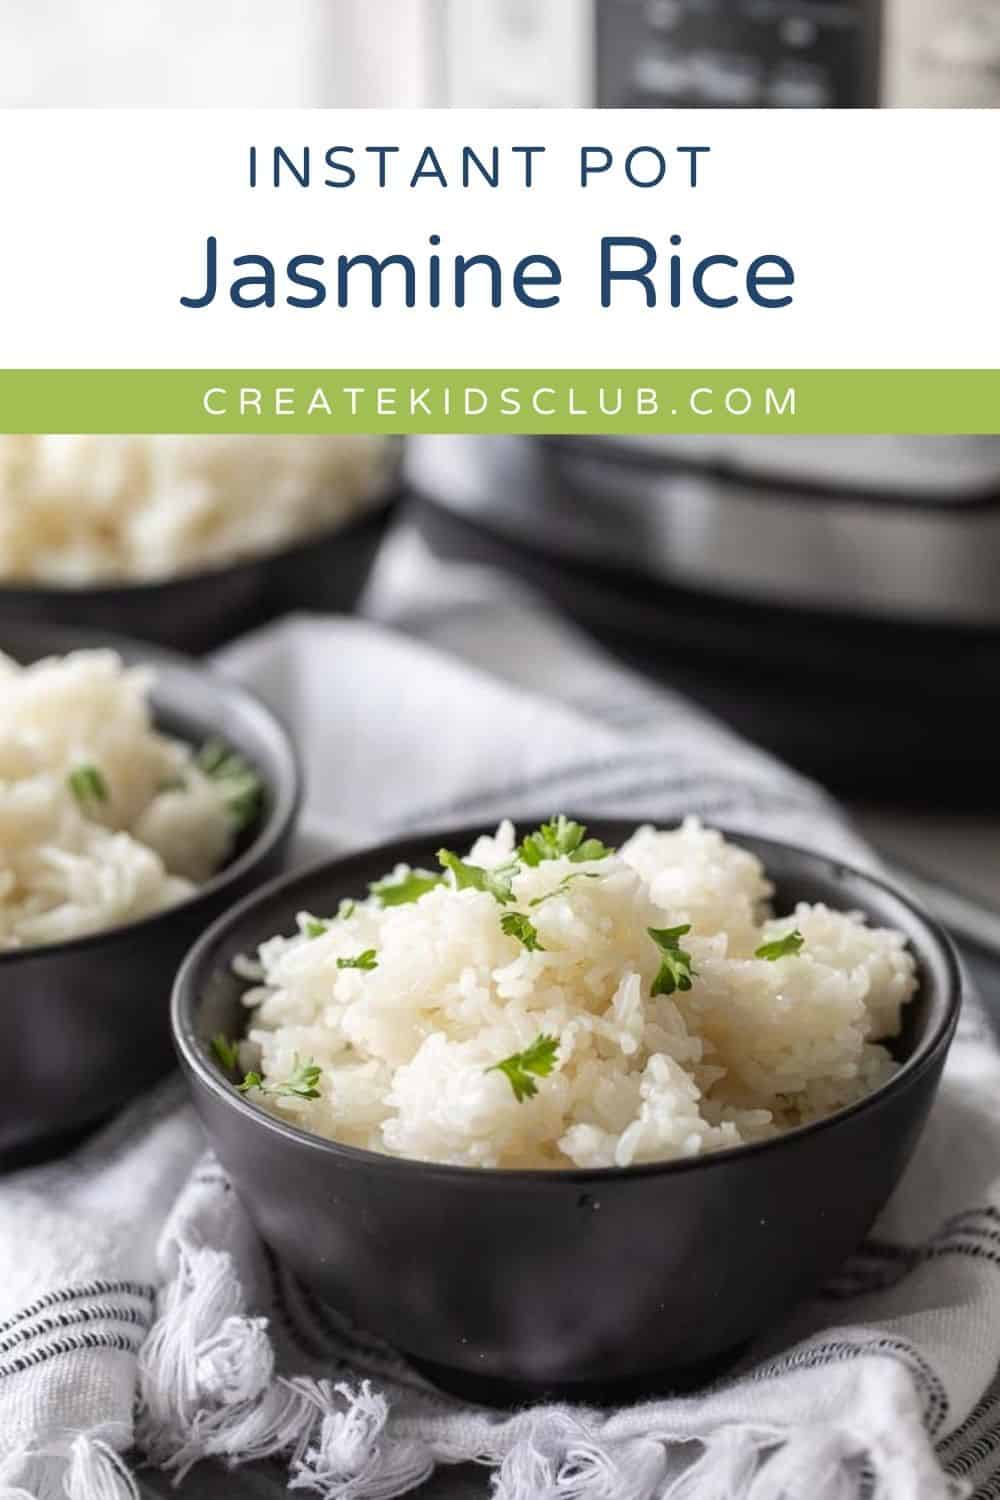 Pin of instant pot jasmine rice shown in a bowl.